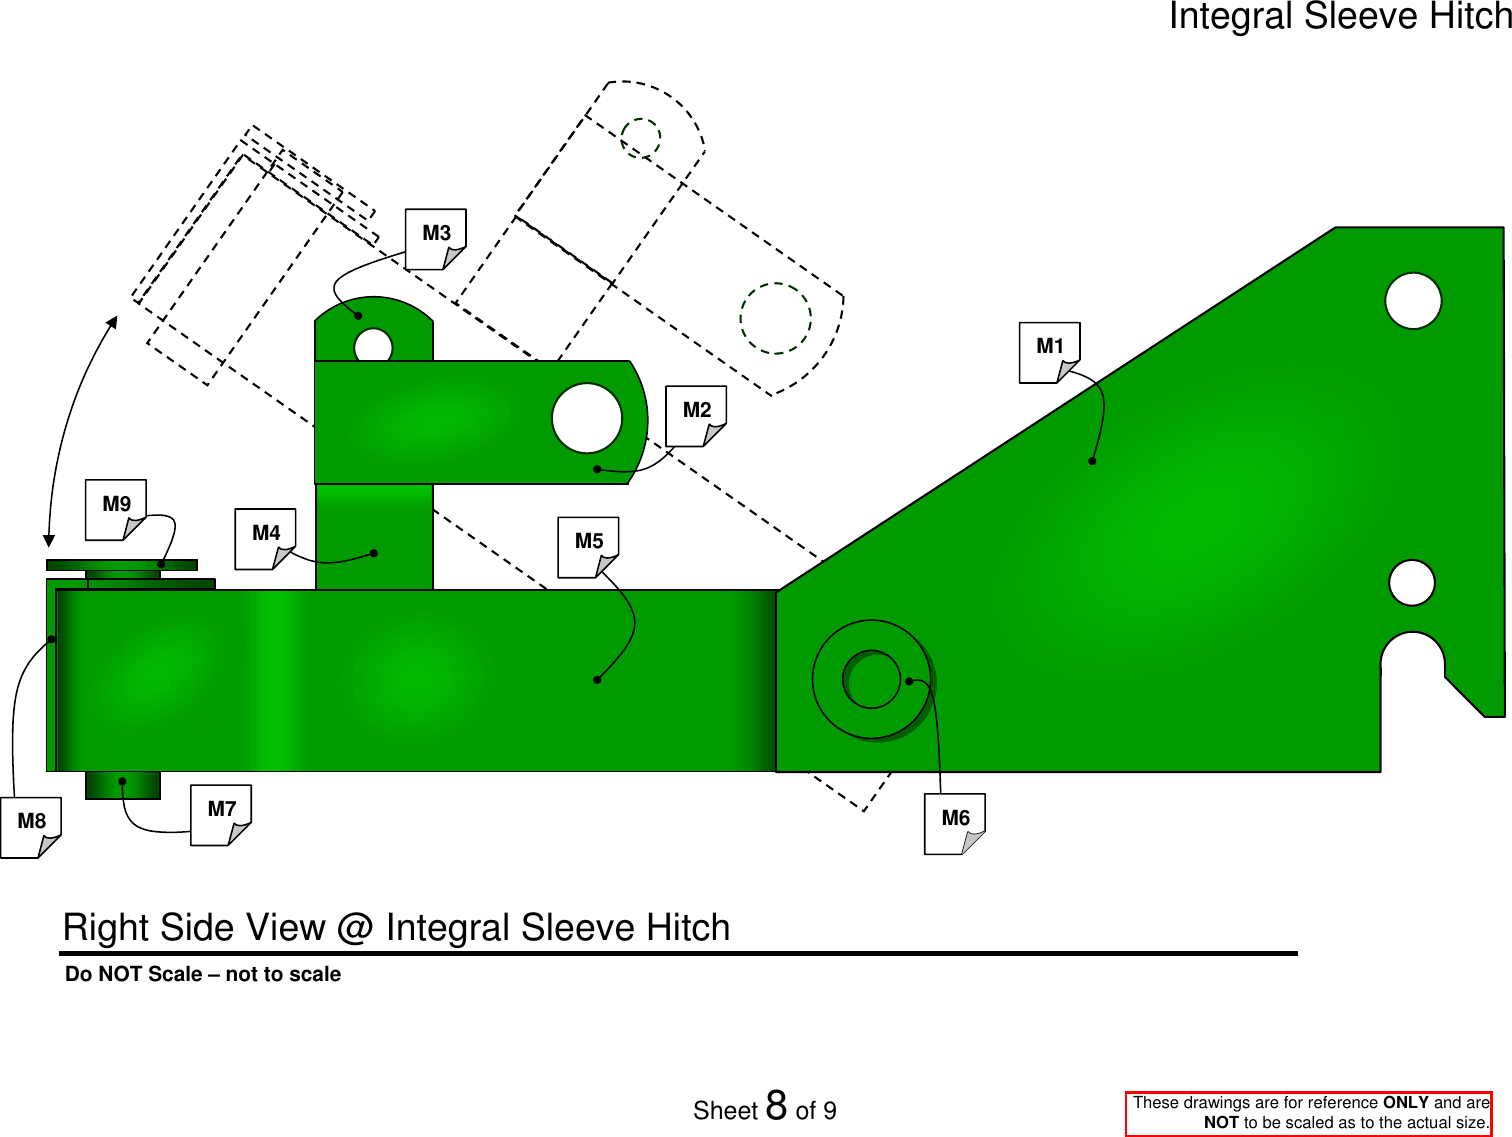 Page 8 of 9 - Integral Sleeve Hitch Dimension Drawings (AM31668) As Of 20081016 Drawings(AM31668)